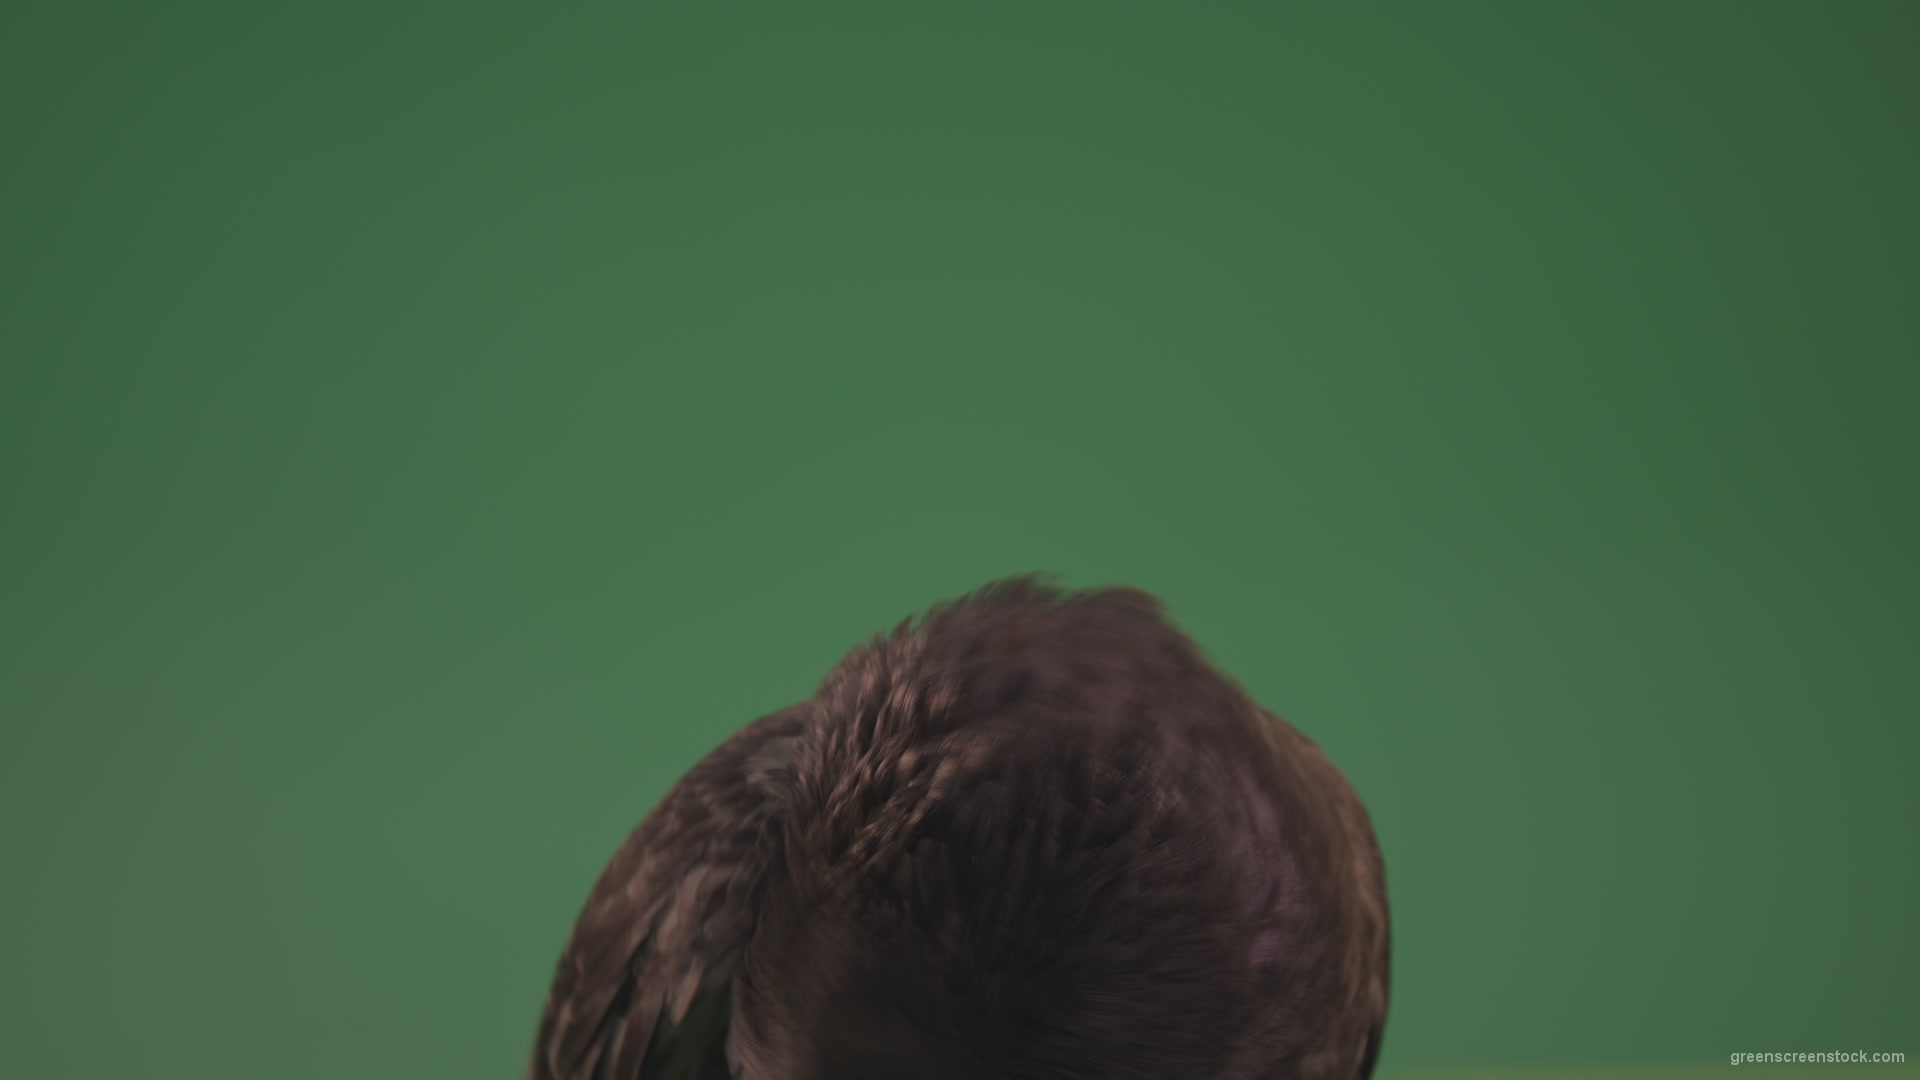 Pigeon-came-to-rest-after-a-long-flight-isolated-on-chromakey-background_001 Green Screen Stock